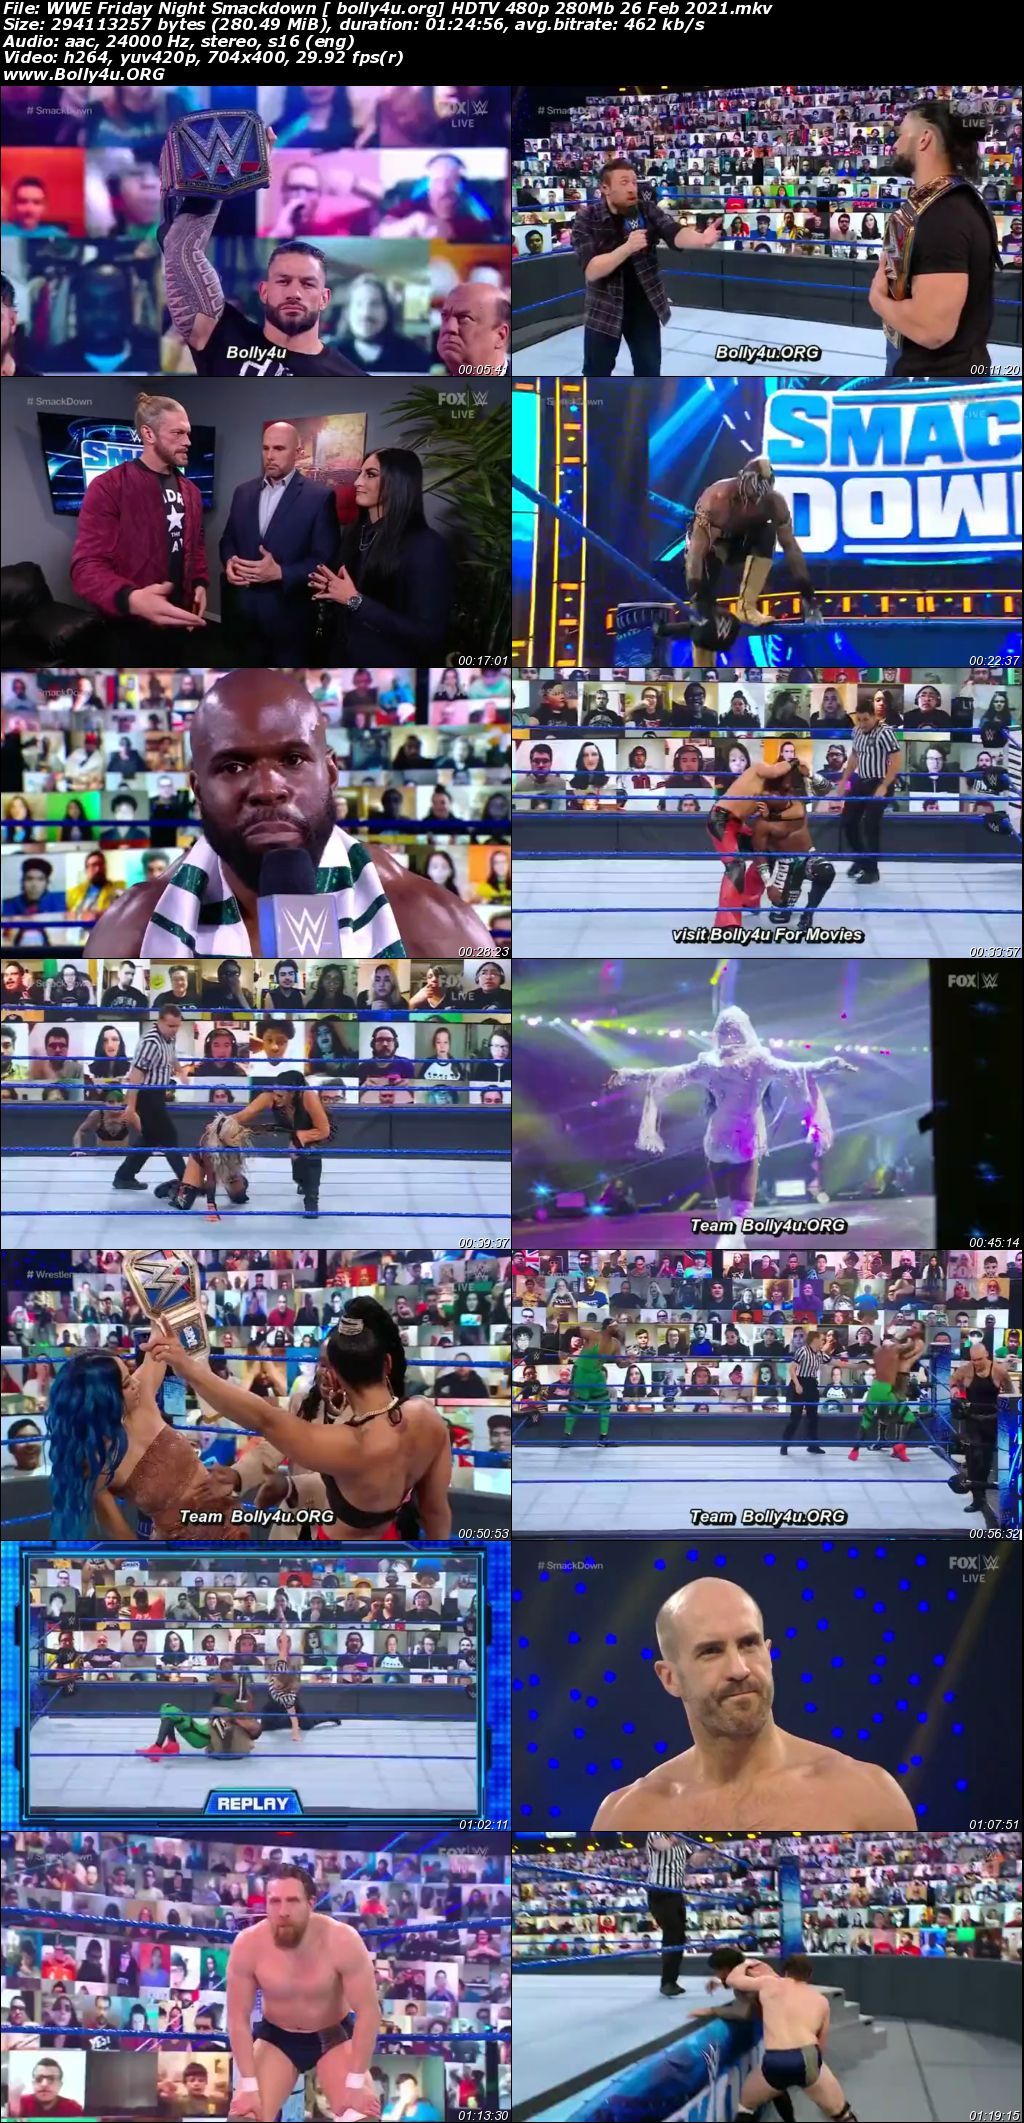 WWE Friday Night Smackdown HDTV 480p 280Mb 26 Feb 2021 Download